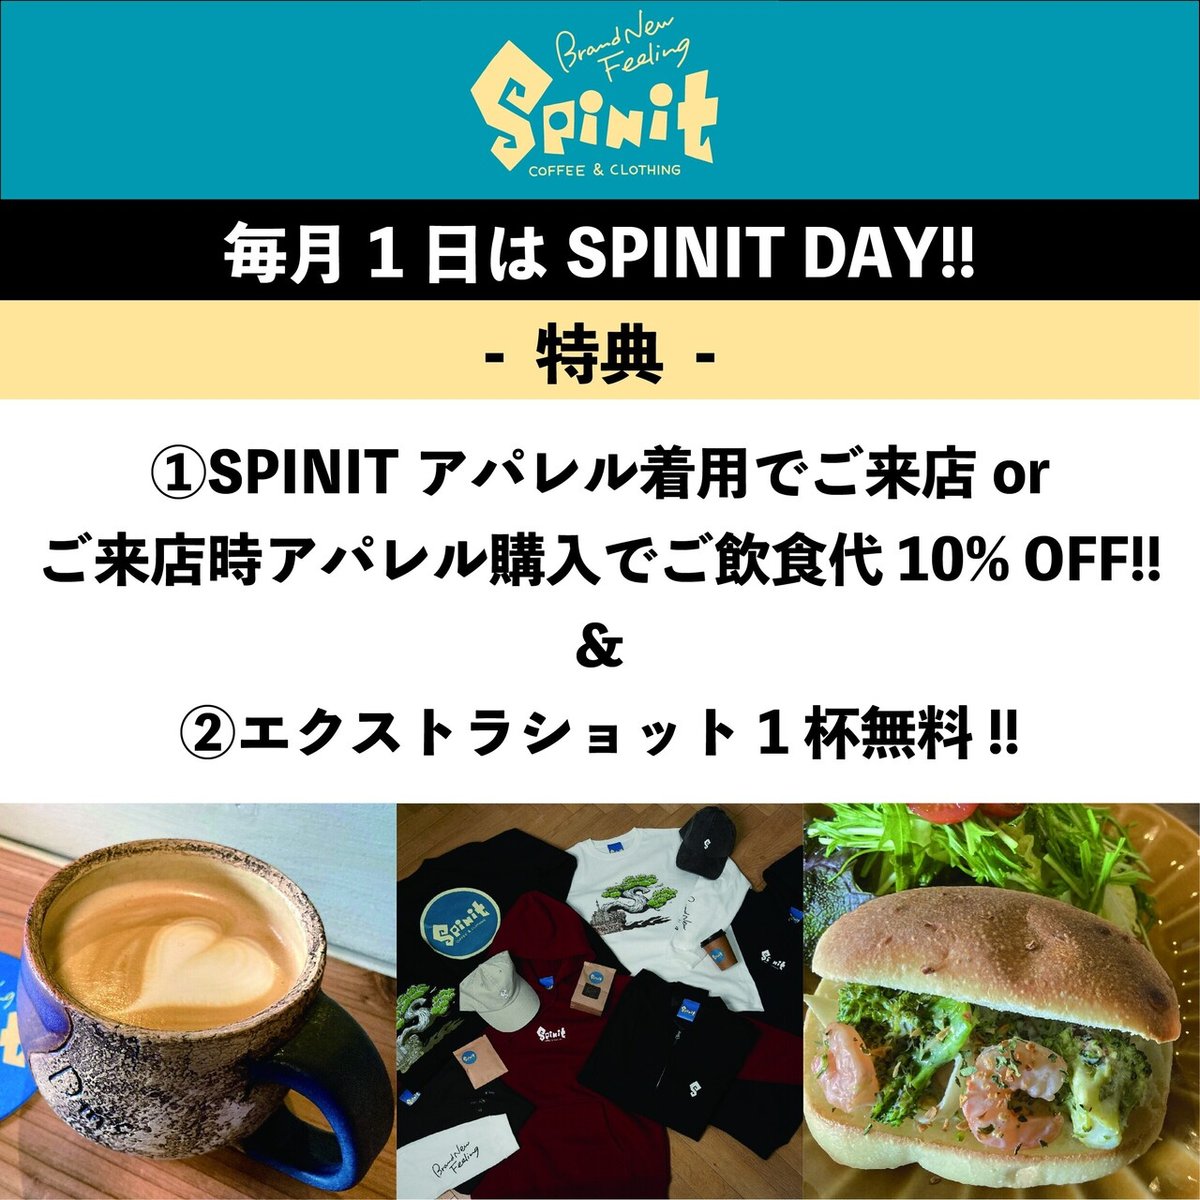 SPINITDAY_アートボード 1